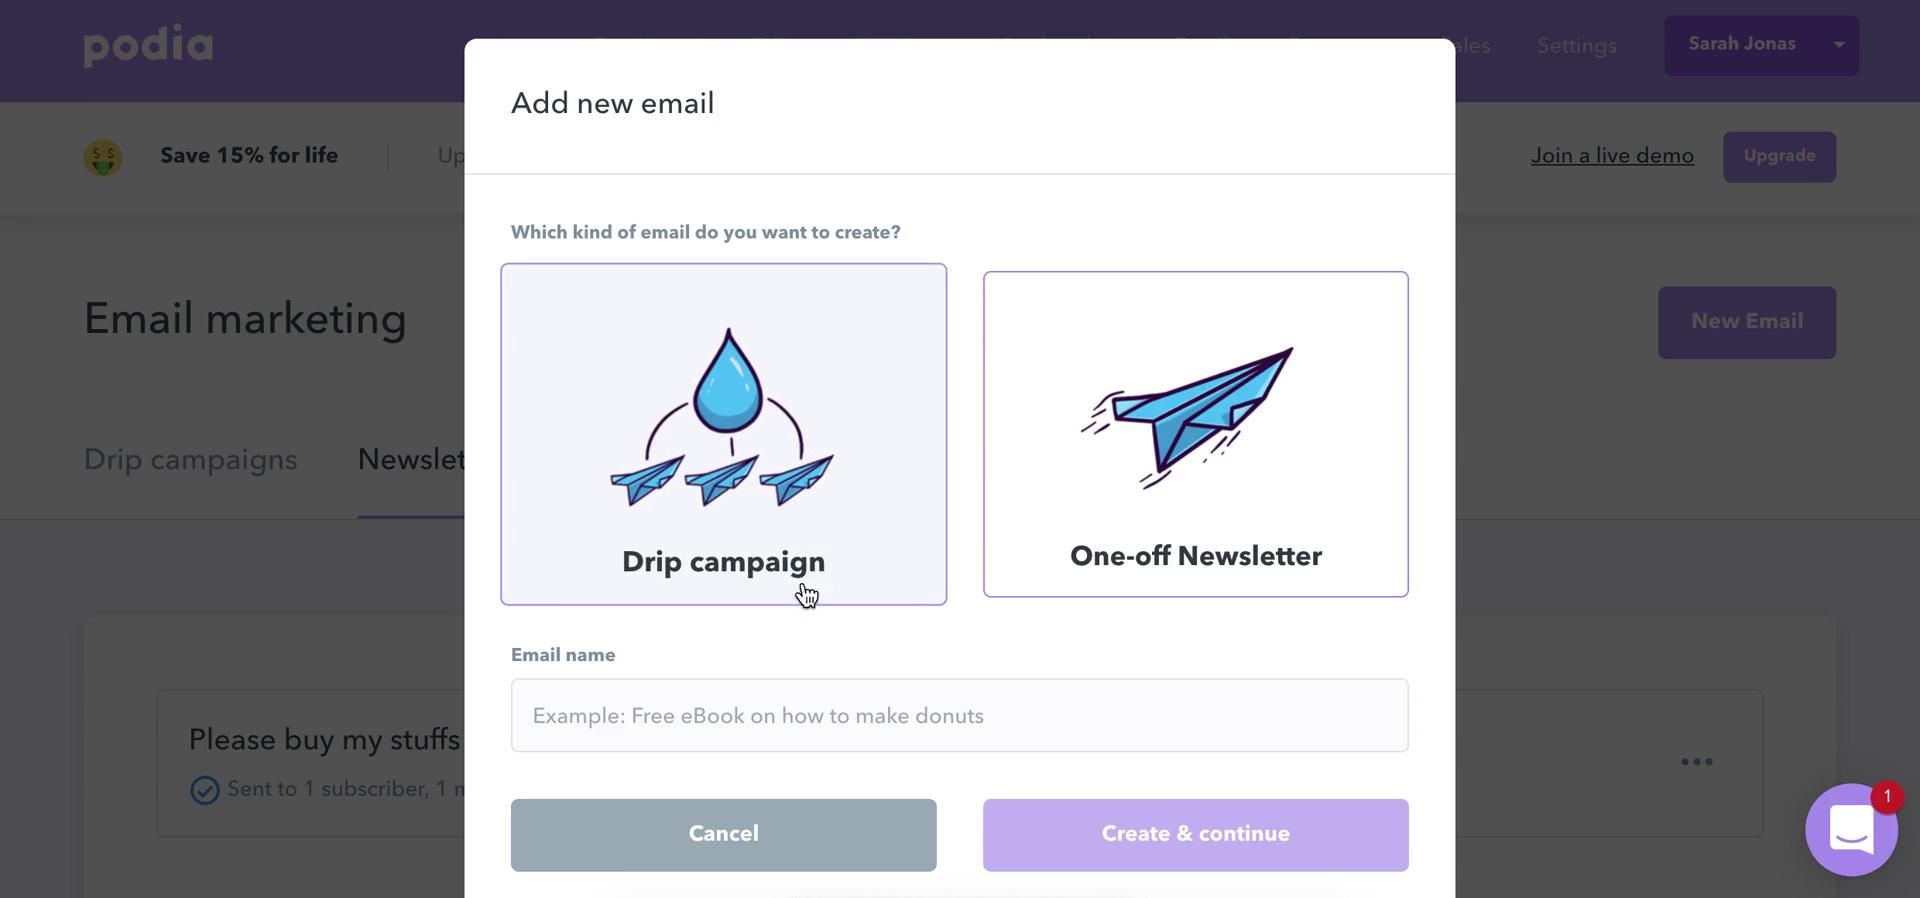 Screenshot of Select campaign type on Creating a drip campaign on Podia user flow